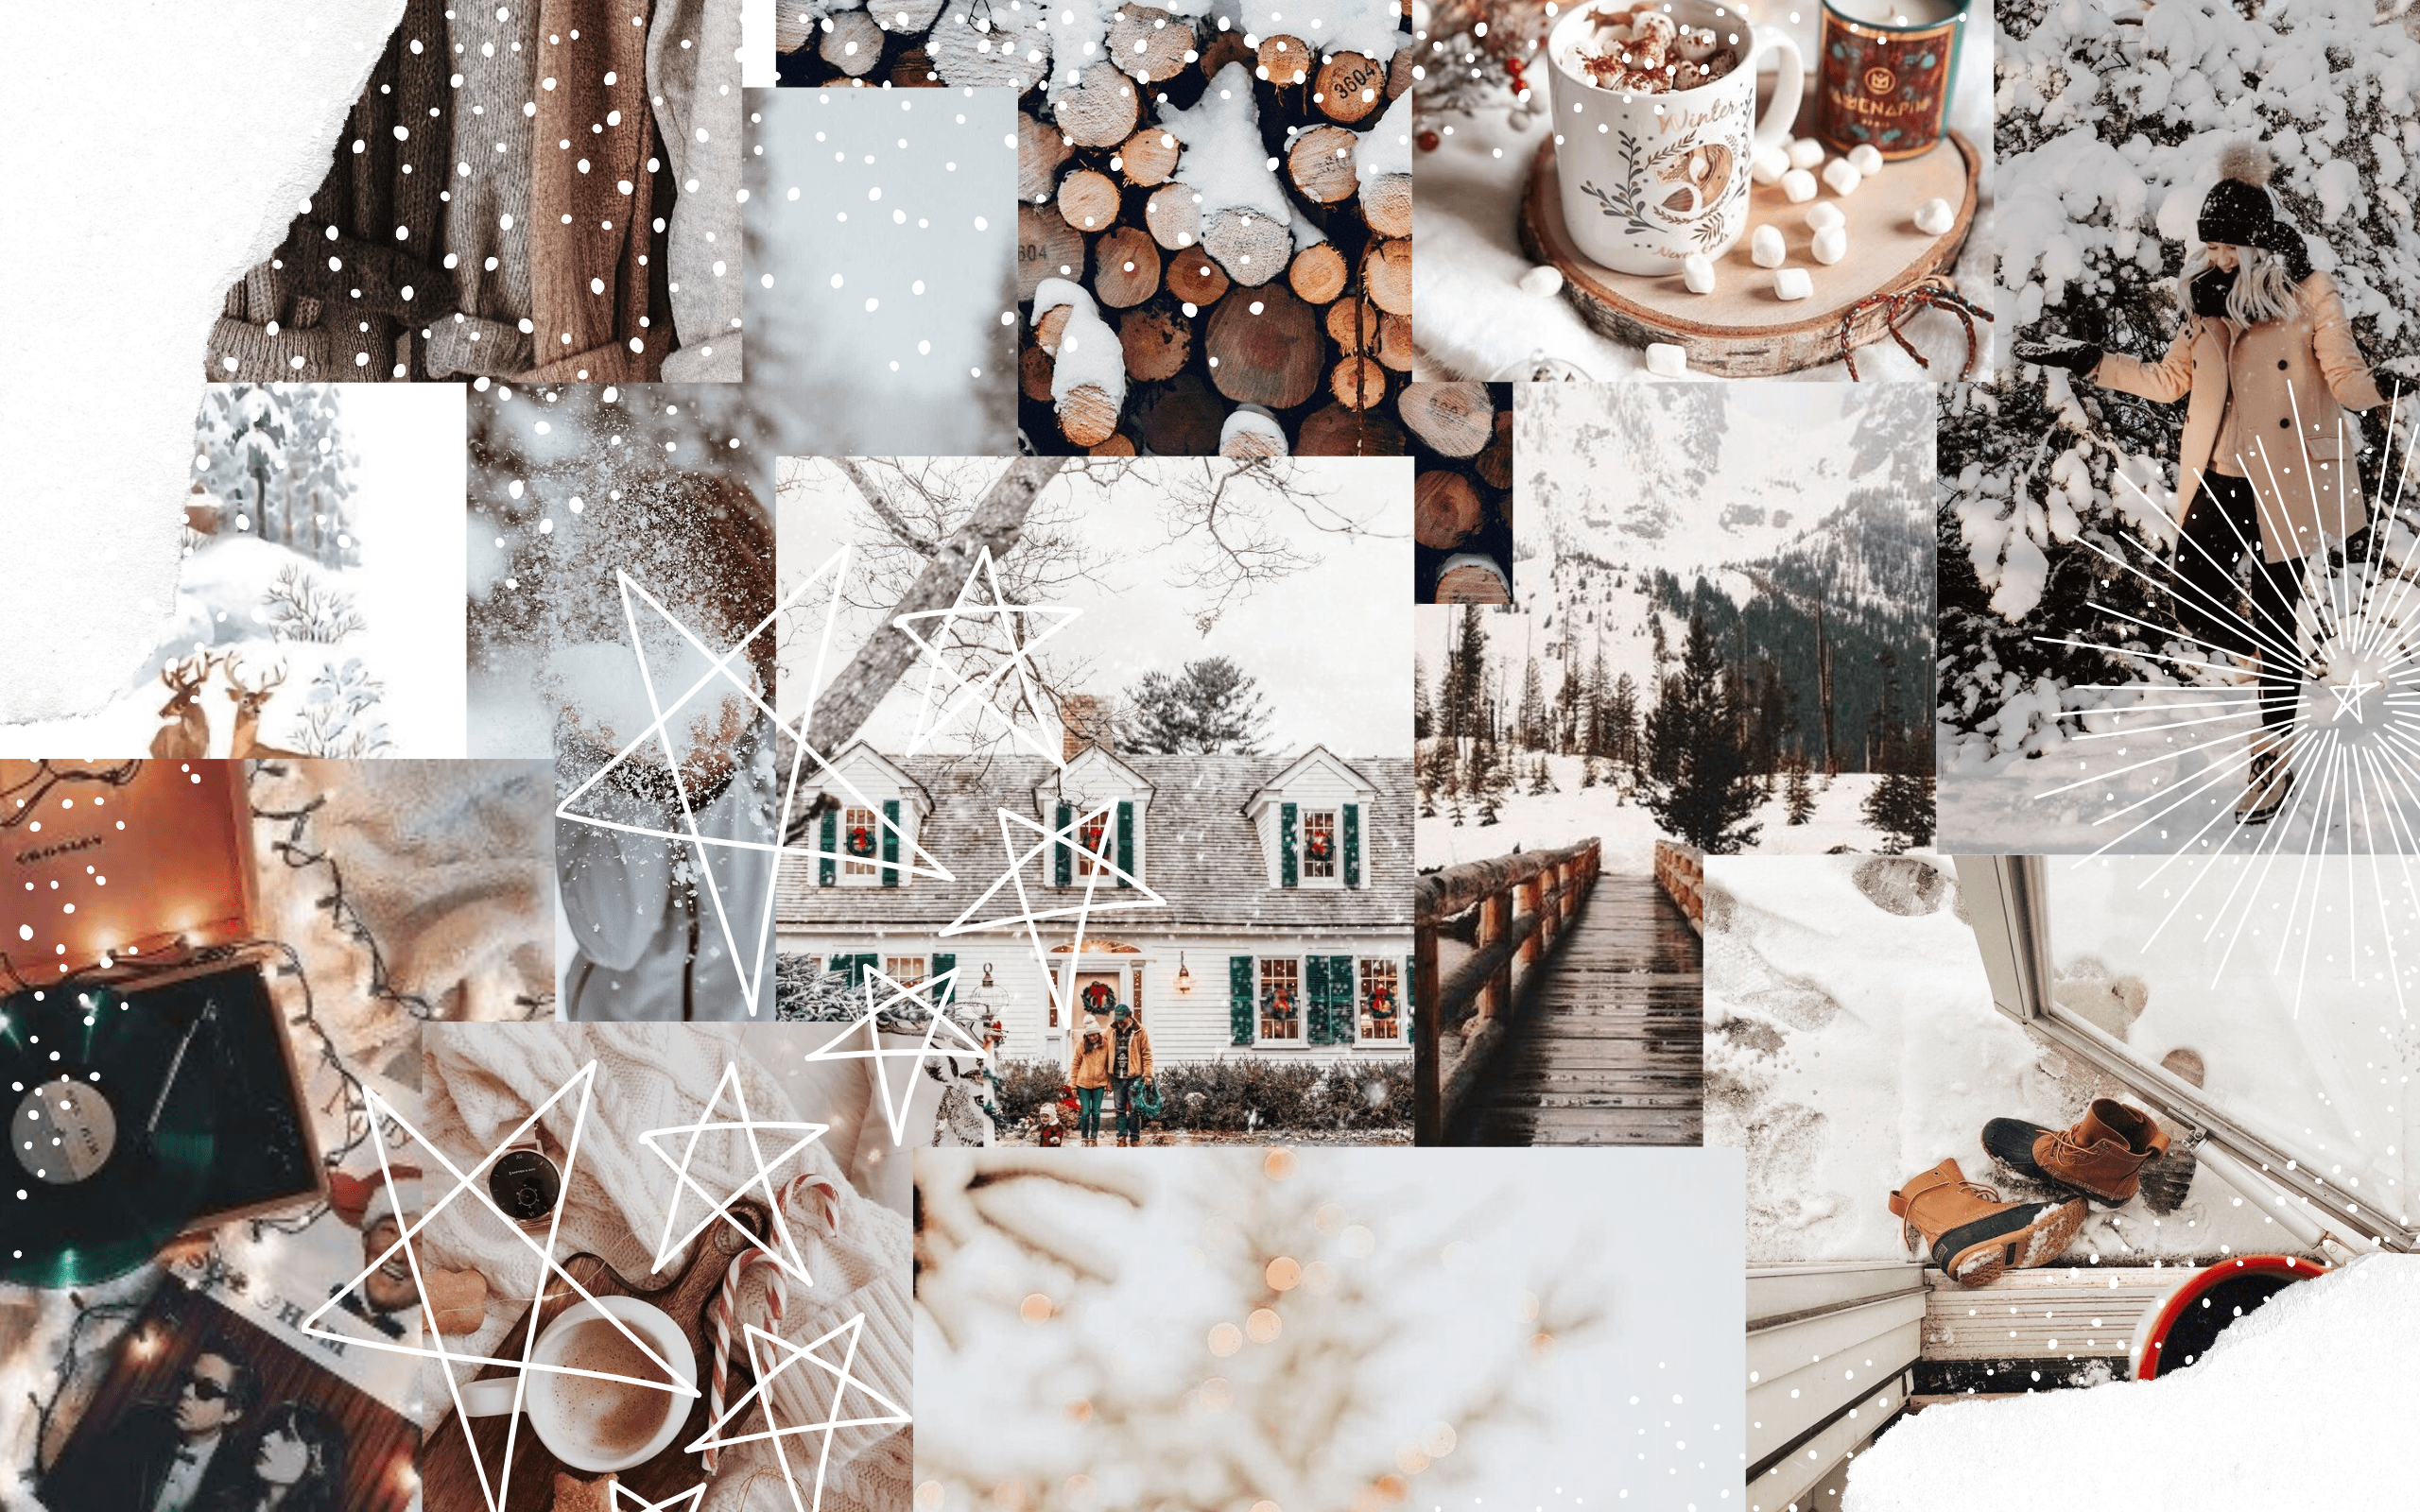 Aesthetic Christmas Collage Desktop Wallpapers  WallpaperSafari  Christmas  wallpaper ipad Christmas desktop wallpaper Cute laptop wallpaper